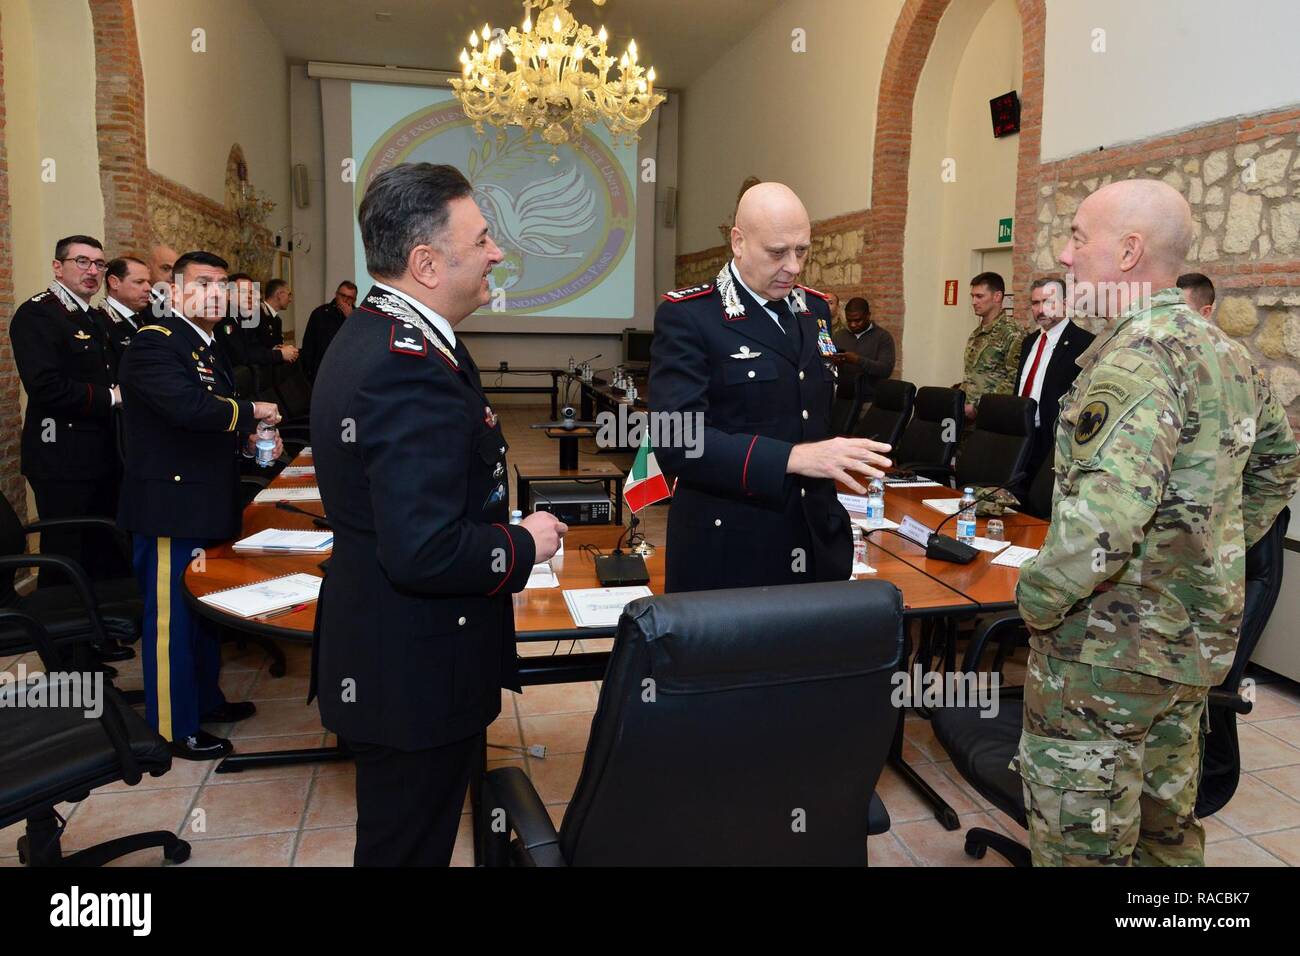 Brig. Gen. Giovanni Pietro Barbano (right), Center of Excellence for Stability Police Units (CoESPU) director, Lt. Gen Vincenzo Coppola (center), Commanding General “Palidoro” Carabinieri Specialized and Mobile Units, Lt. Gen. Charles D. Luckey (left), Commanding General U.S. Army Reserve Command, talk during visit at Center of Excellence for Stability Police Units (CoESPU) Vicenza, Italy, January 20, 2017. Stock Photo